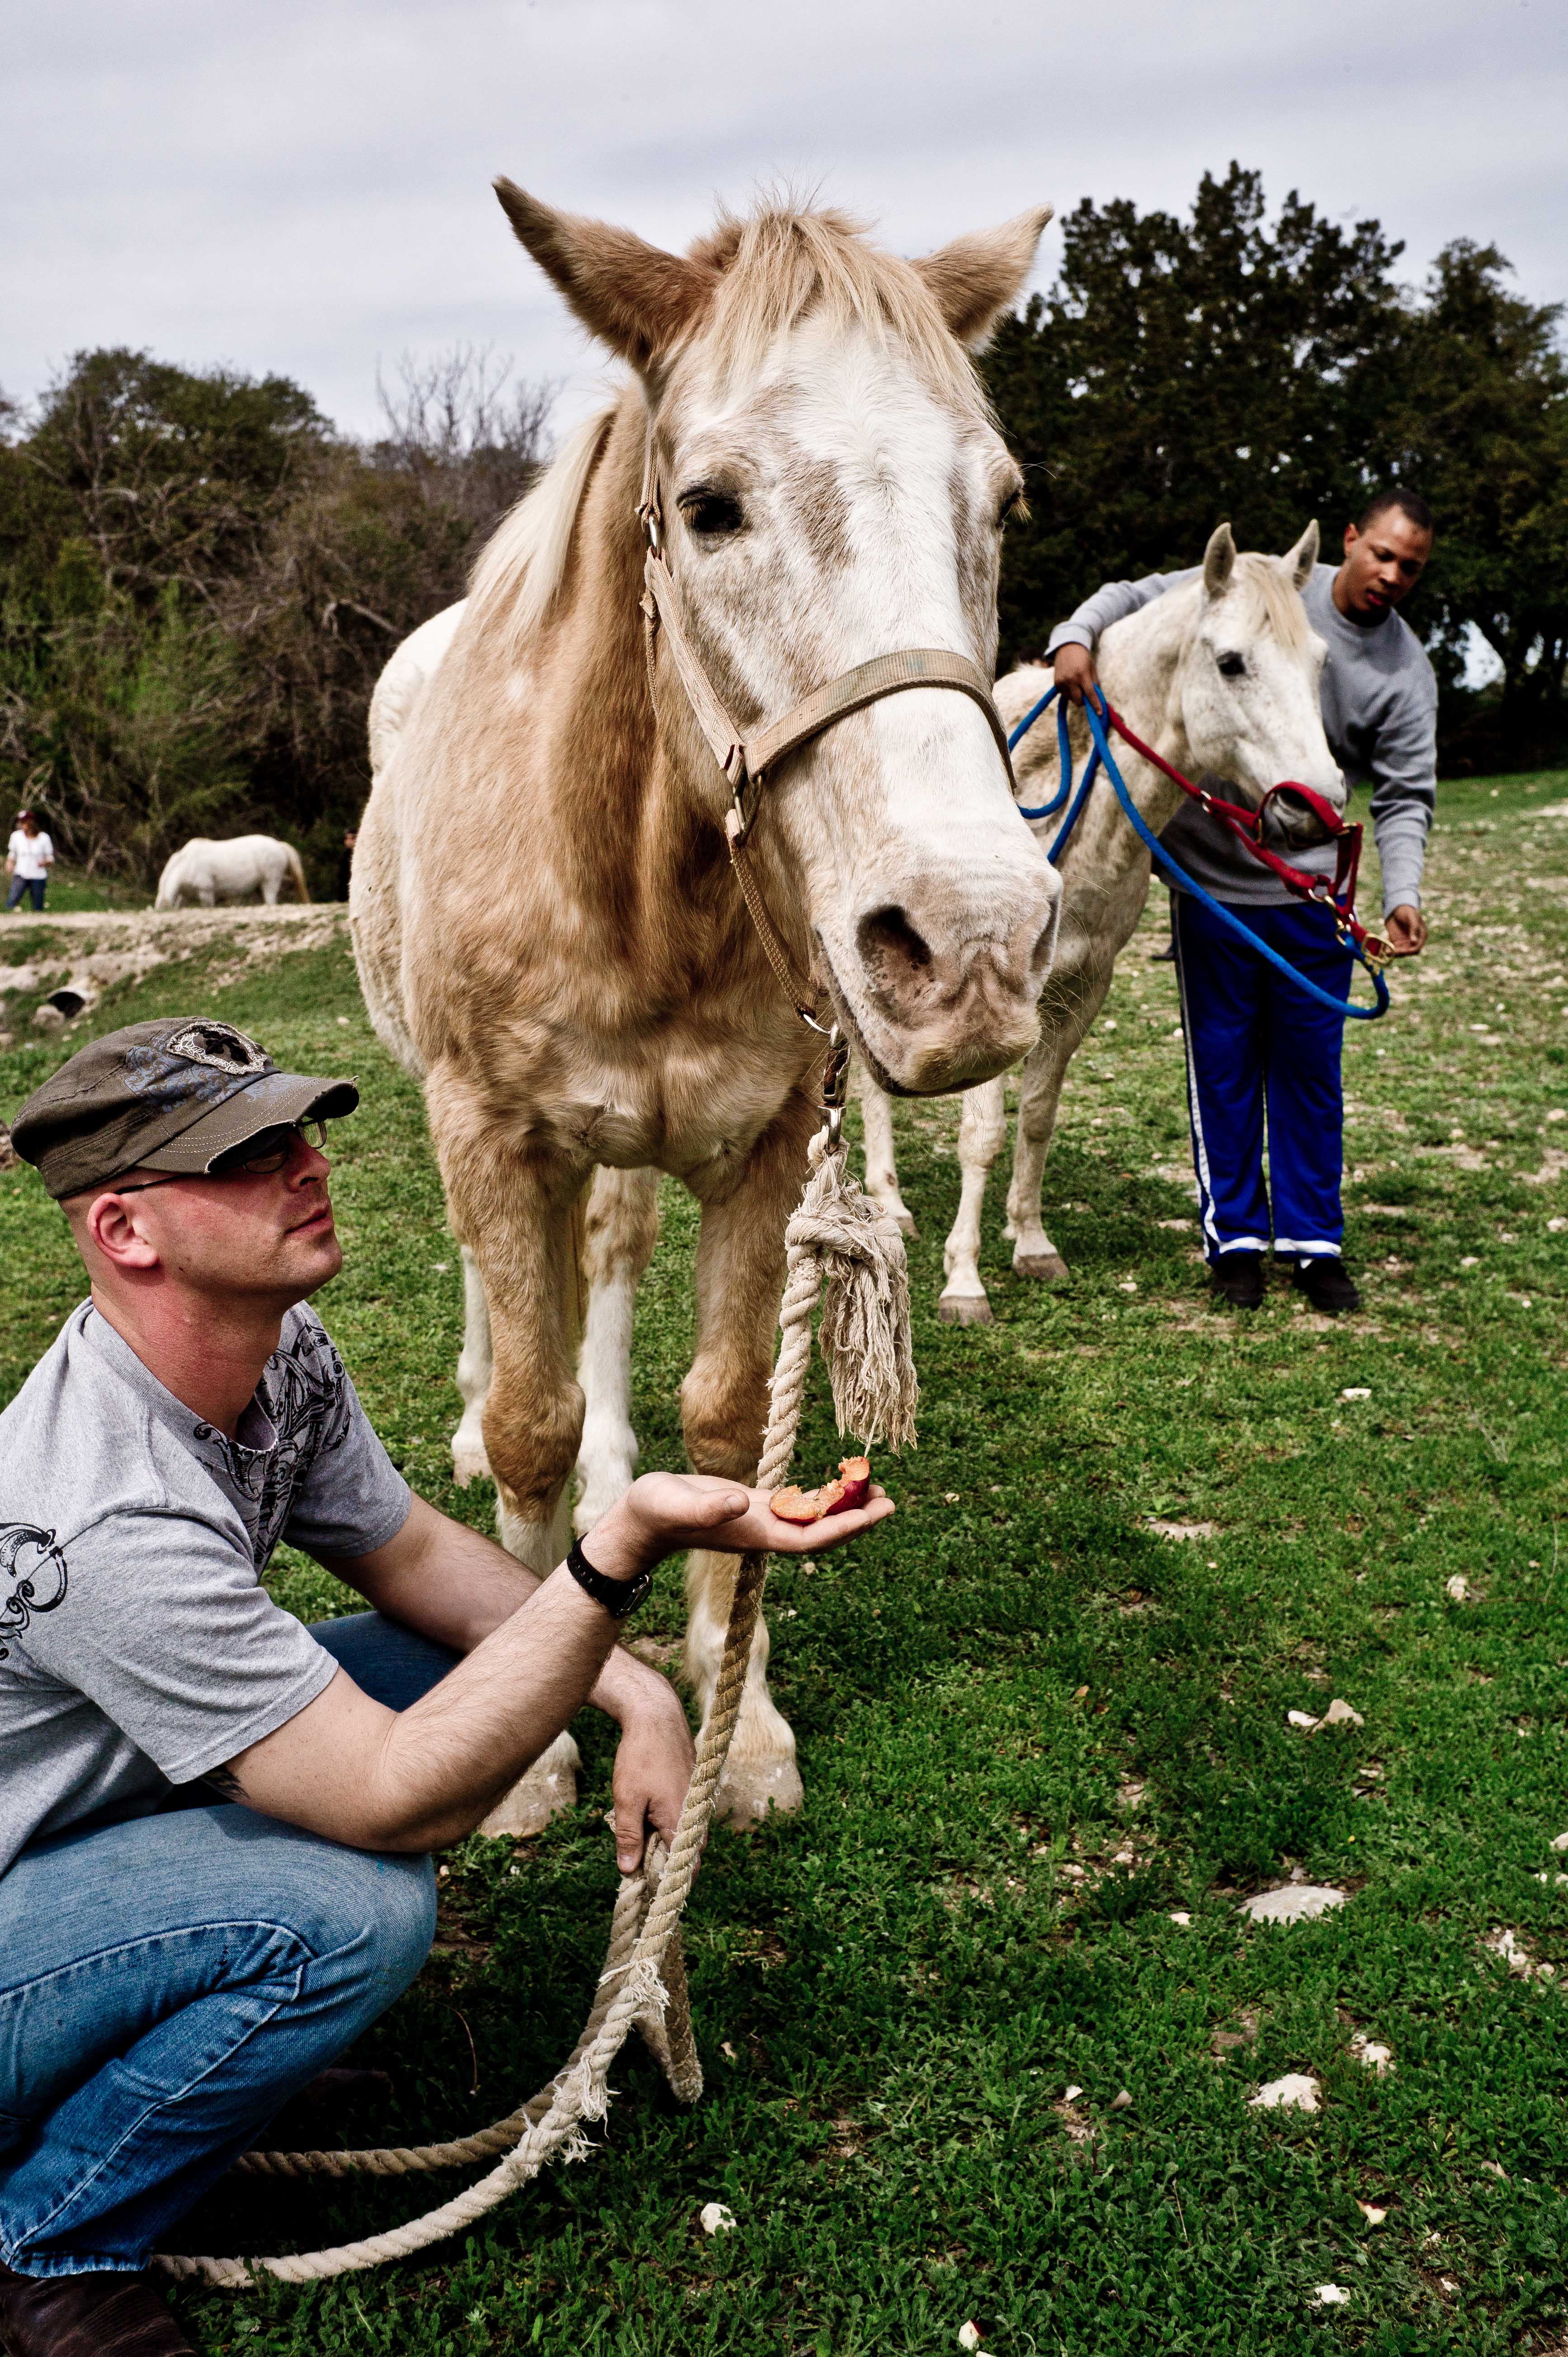 Pfc. James Love (foreground), a radio operator and maintainer assigned to Headquarters and Headquarters Company, 81st Civil Affairs Battalion, 85th Civil Affairs Brigade, feeds his newly harnessed horse an apple while Pfc. Isaac Hughes, a chaplain assistant assigned to HHC, 81st CA BN, 85th CA Bde., attempts to harness his own horse during a Strong Bonds single Soldier retreat held March 1-3 at Tyson’s Corner Retreat and Wellness Center in Lampasas, TX. (Photo by Staff Sgt. Michael J. Dator, 85th Civil Affairs Brigade Public Affairs)